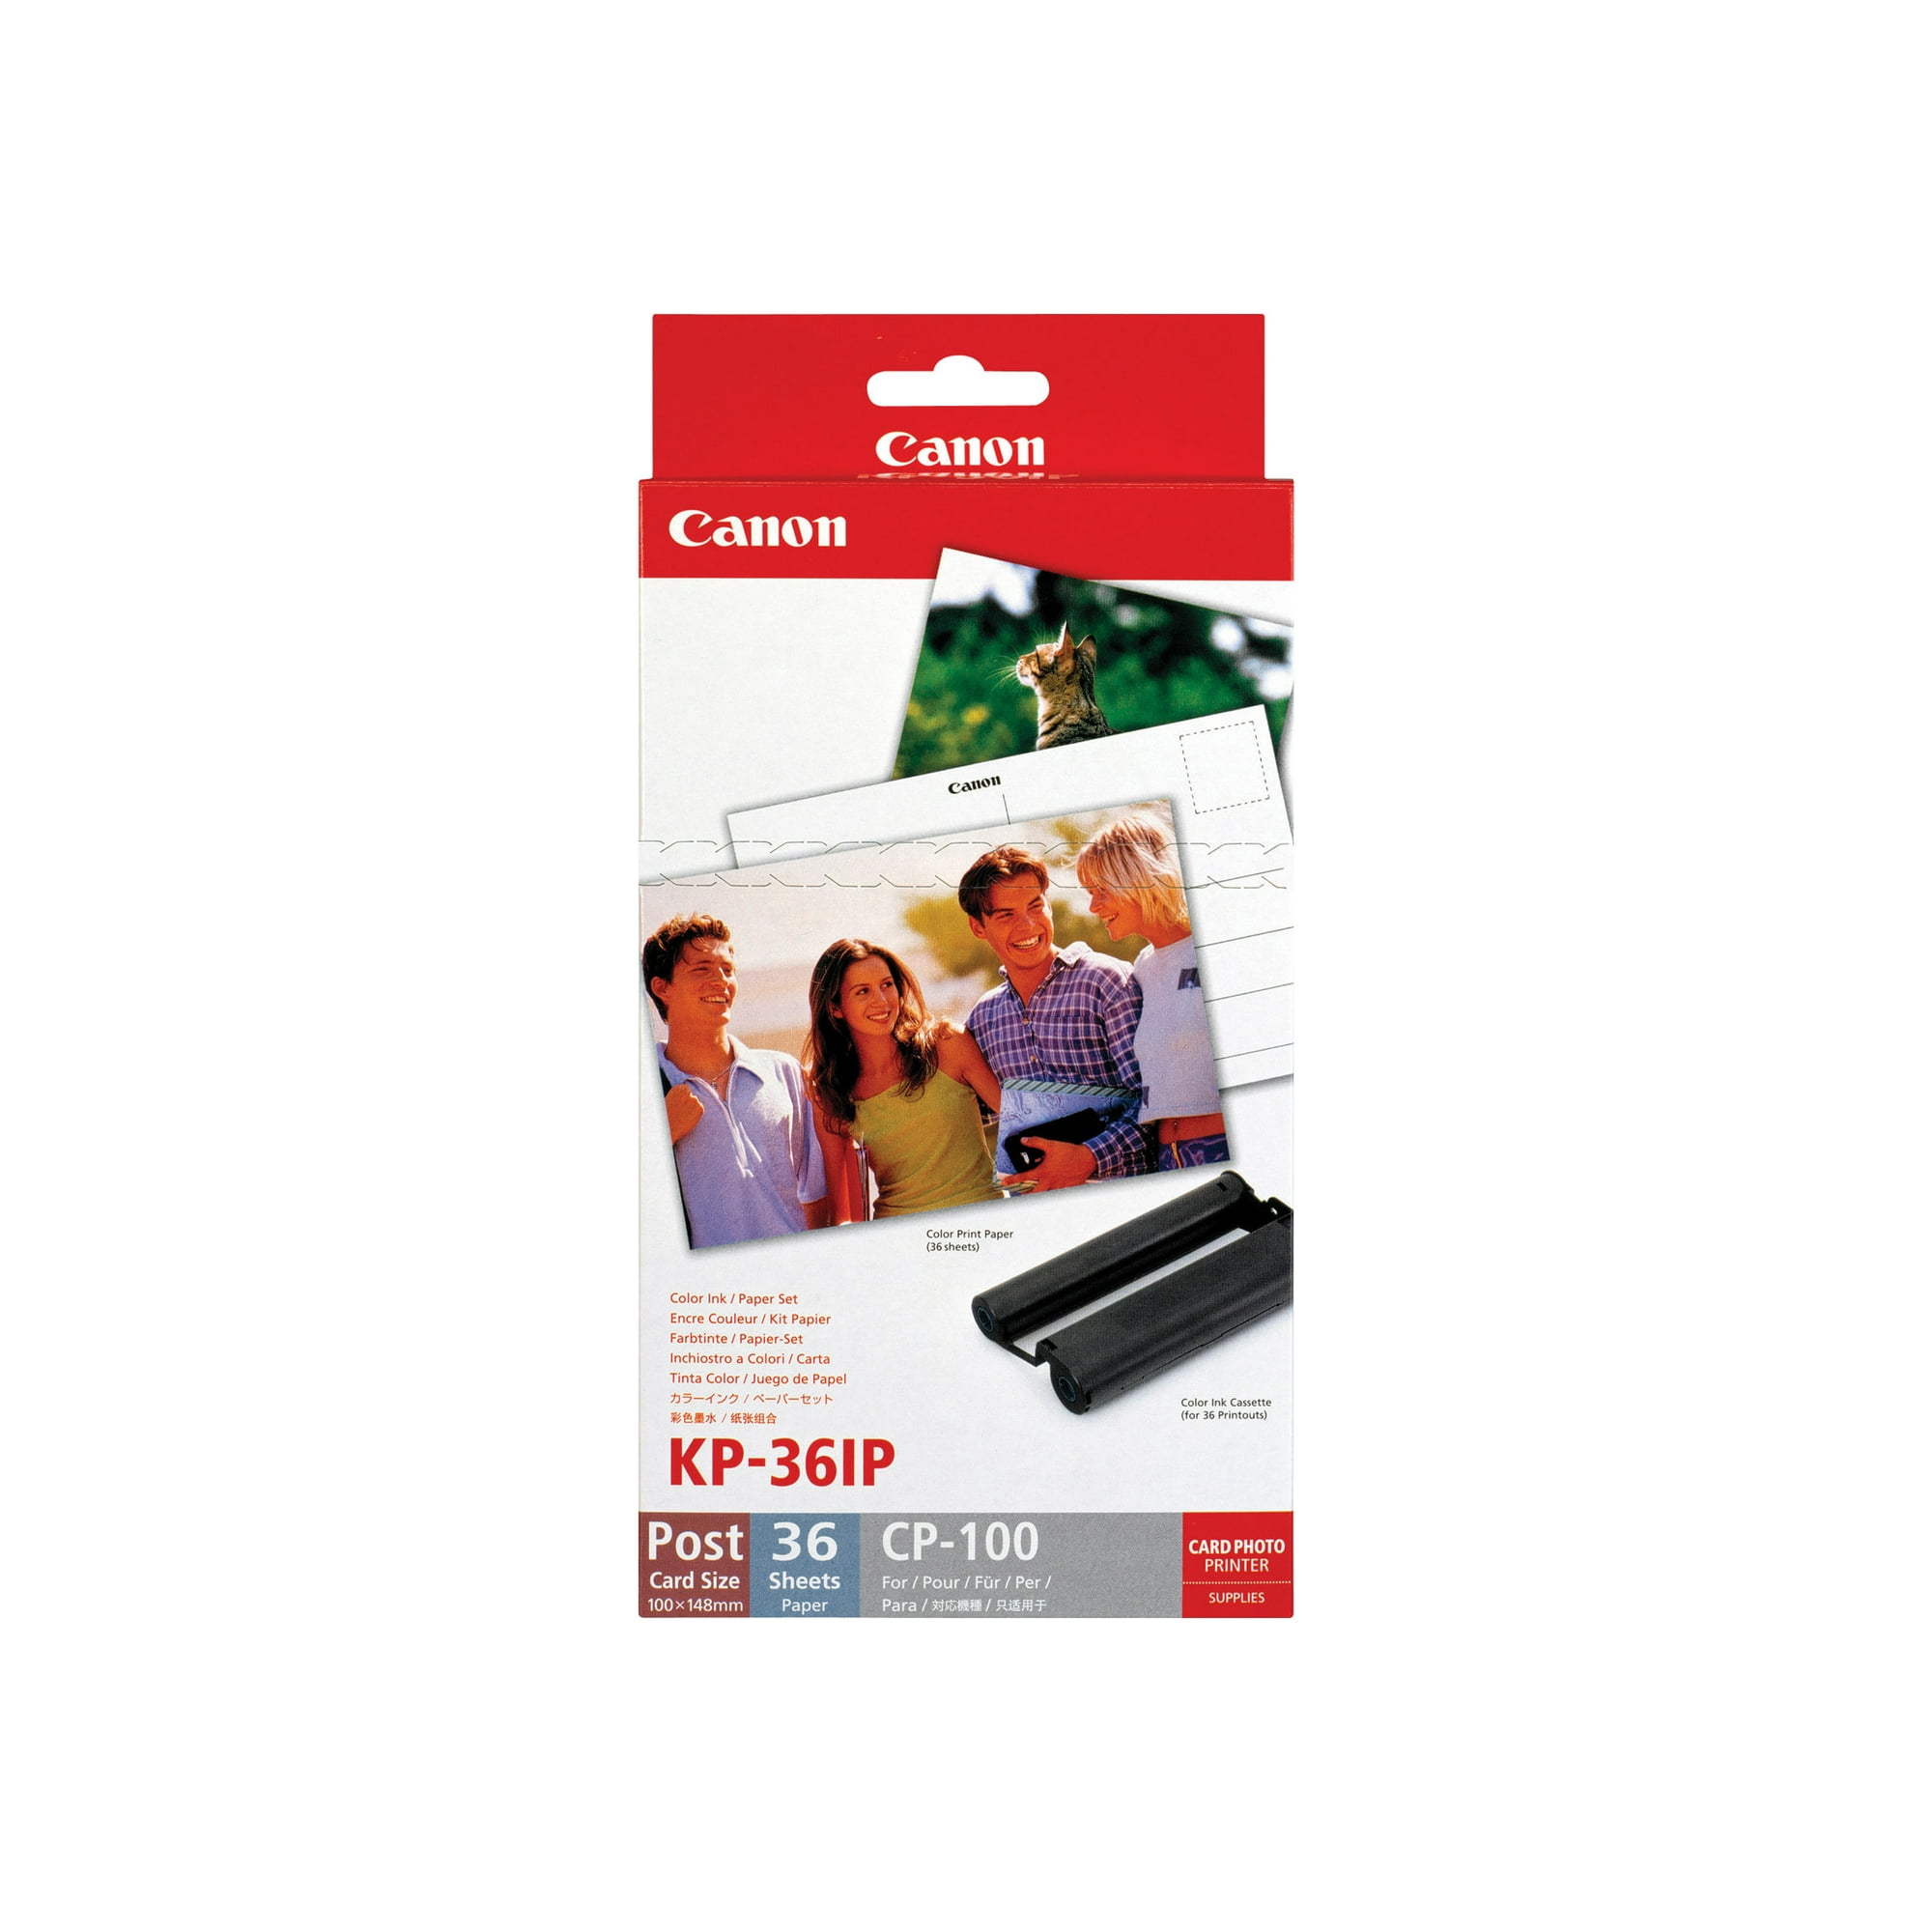 Canon KP-36IP - Print cartridge / paper kit - for Canon SELPHY